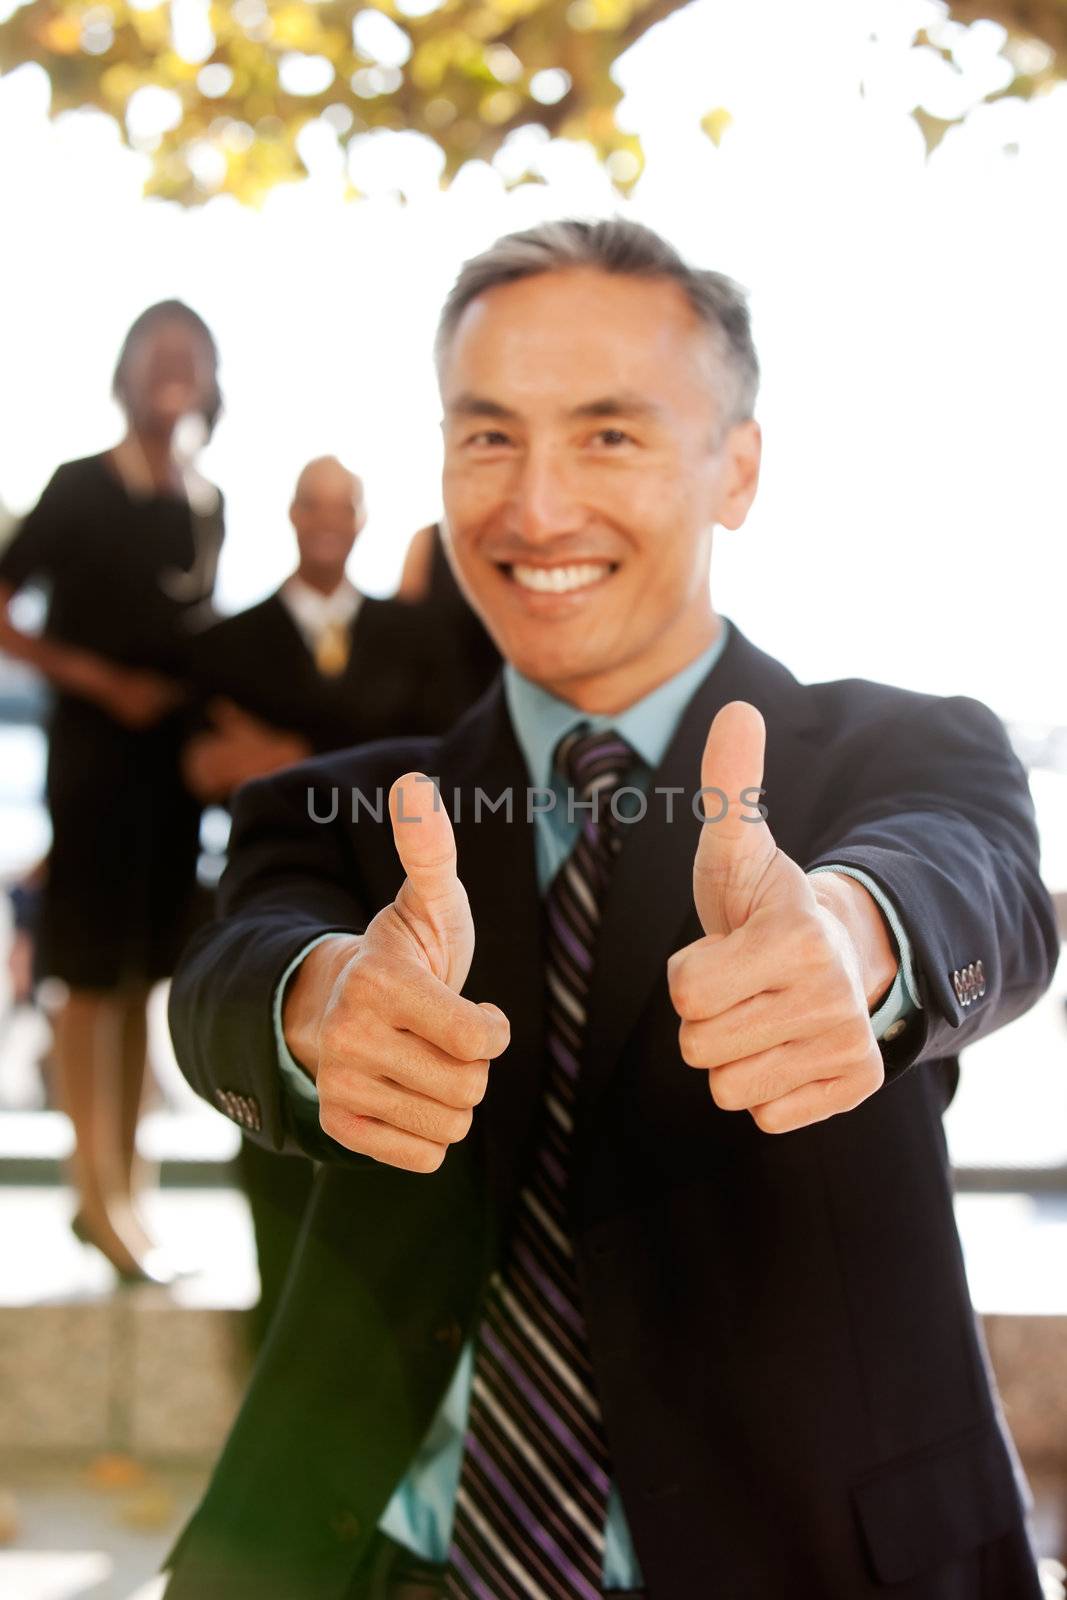 A business man with thumbs up - critical focus on the thumbs